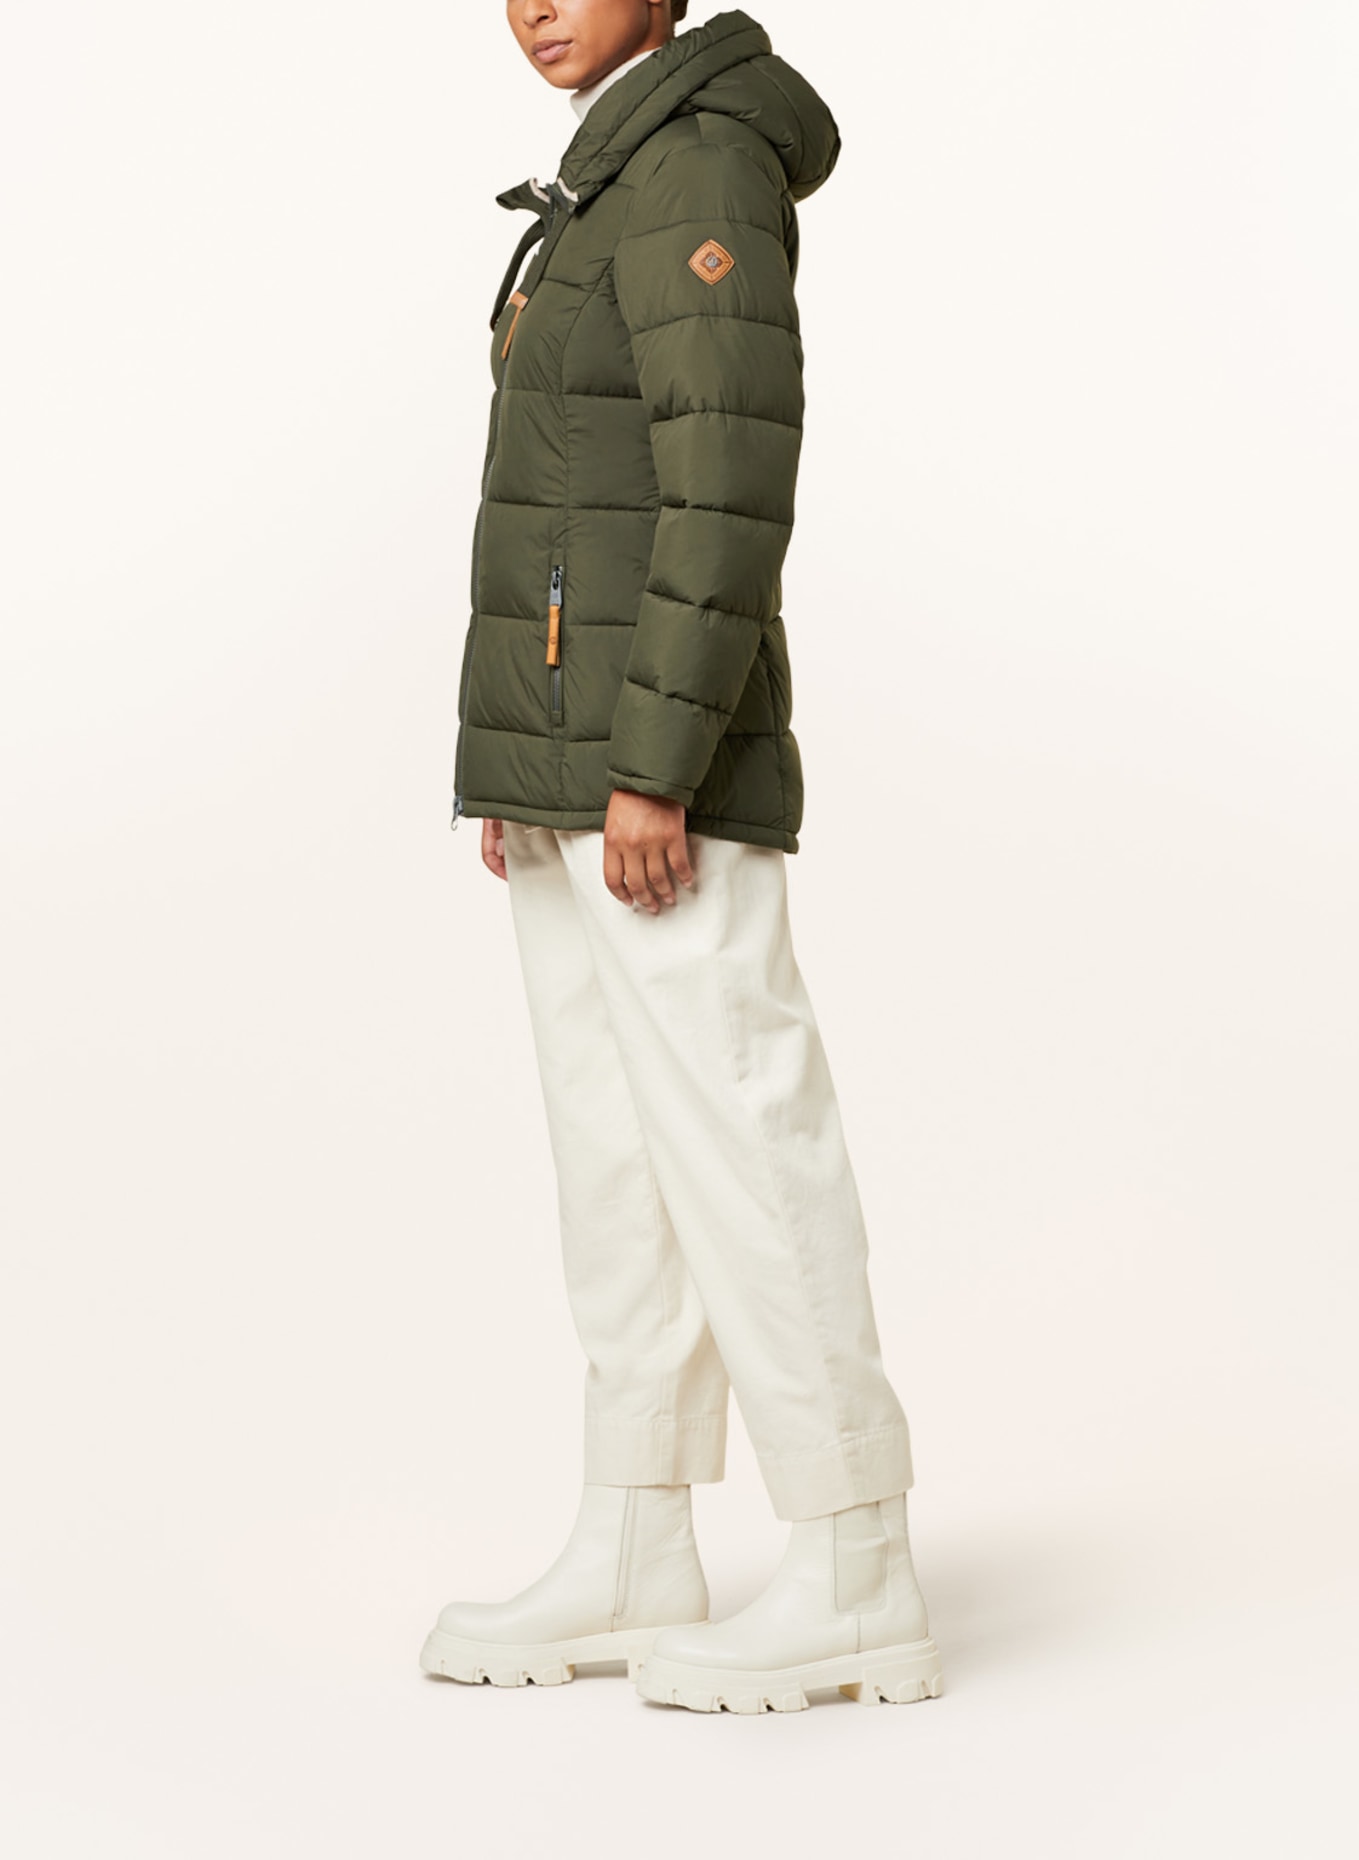 G.I.G.A. DX by killtec Quilted jacket in olive